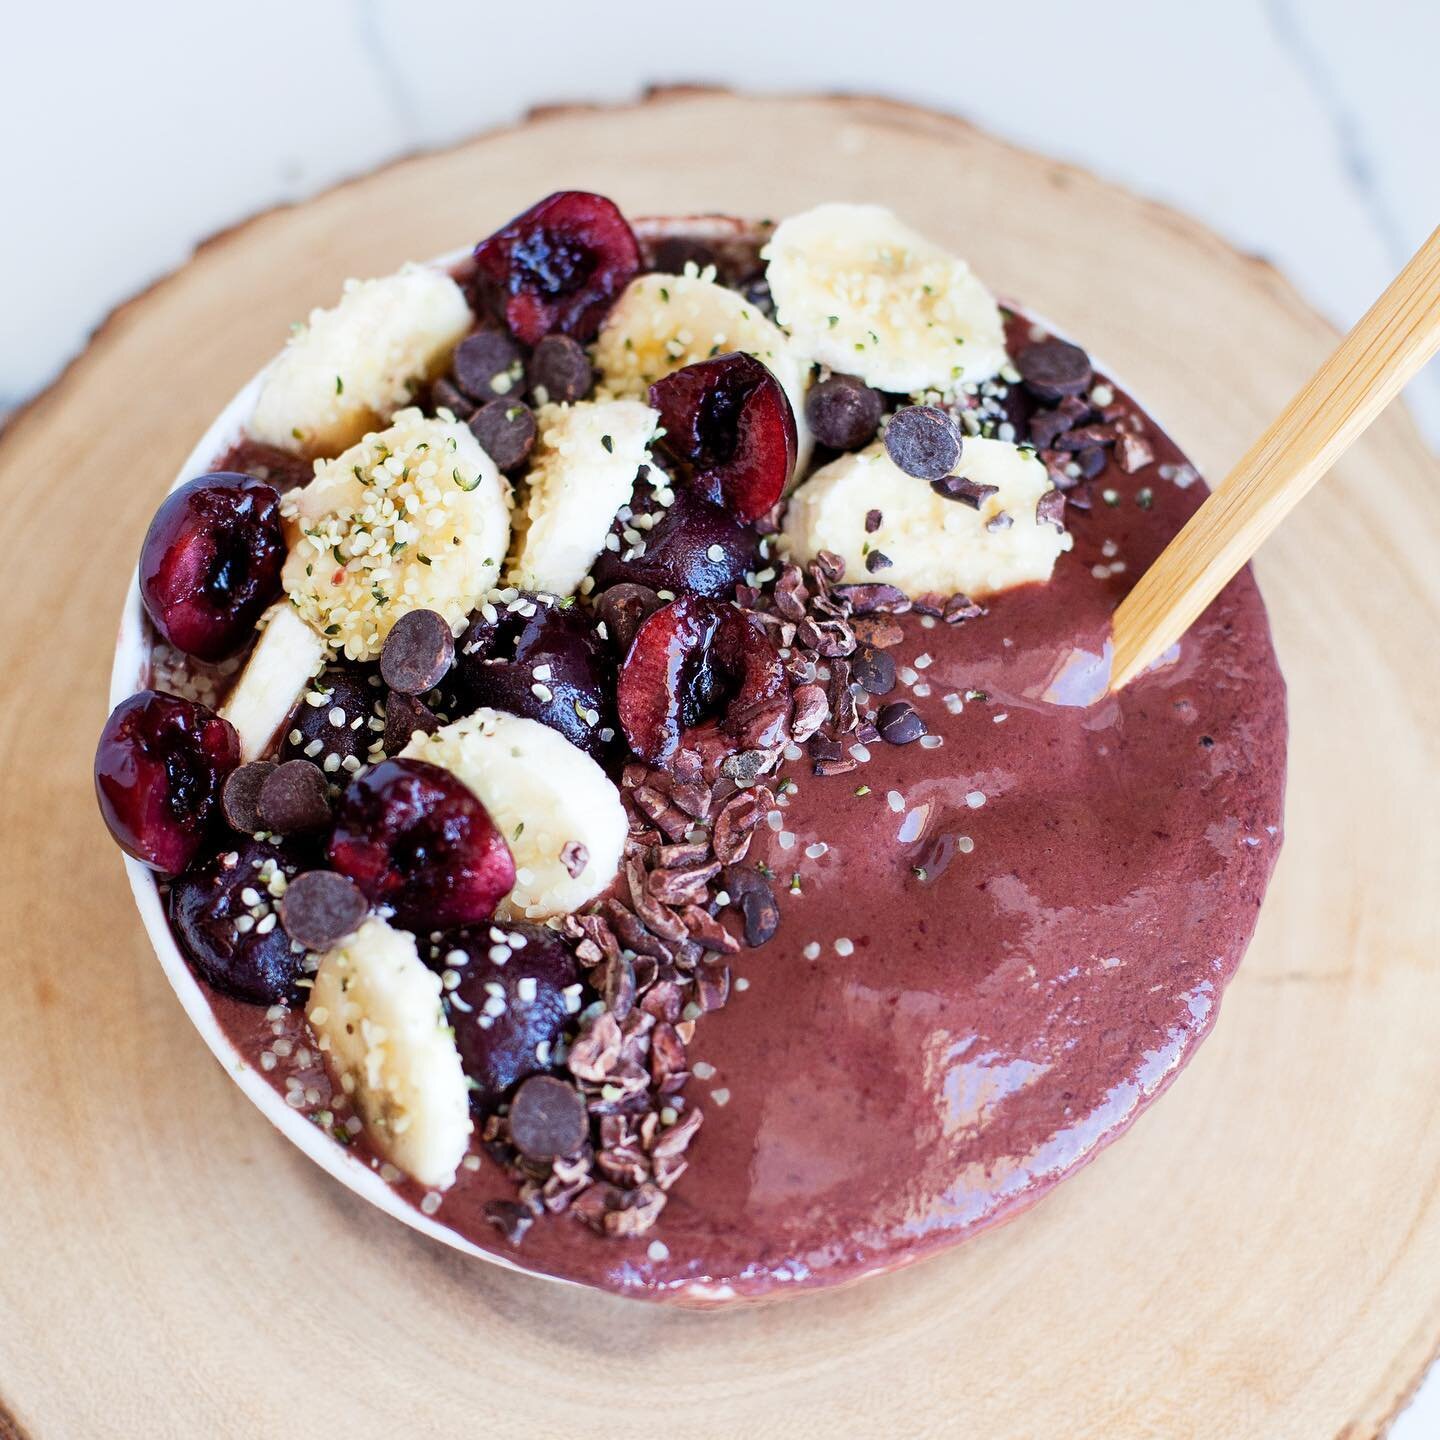 Do you like chocolate for breakfast?!? This Chocolate Cherry Smoothie Bowl is a chocolate lovers dream come true and doubles as a great guilt-free dessert.
&nbsp;
The base of this smoothie bowl is frozen dark cherries which are off the charts in anti